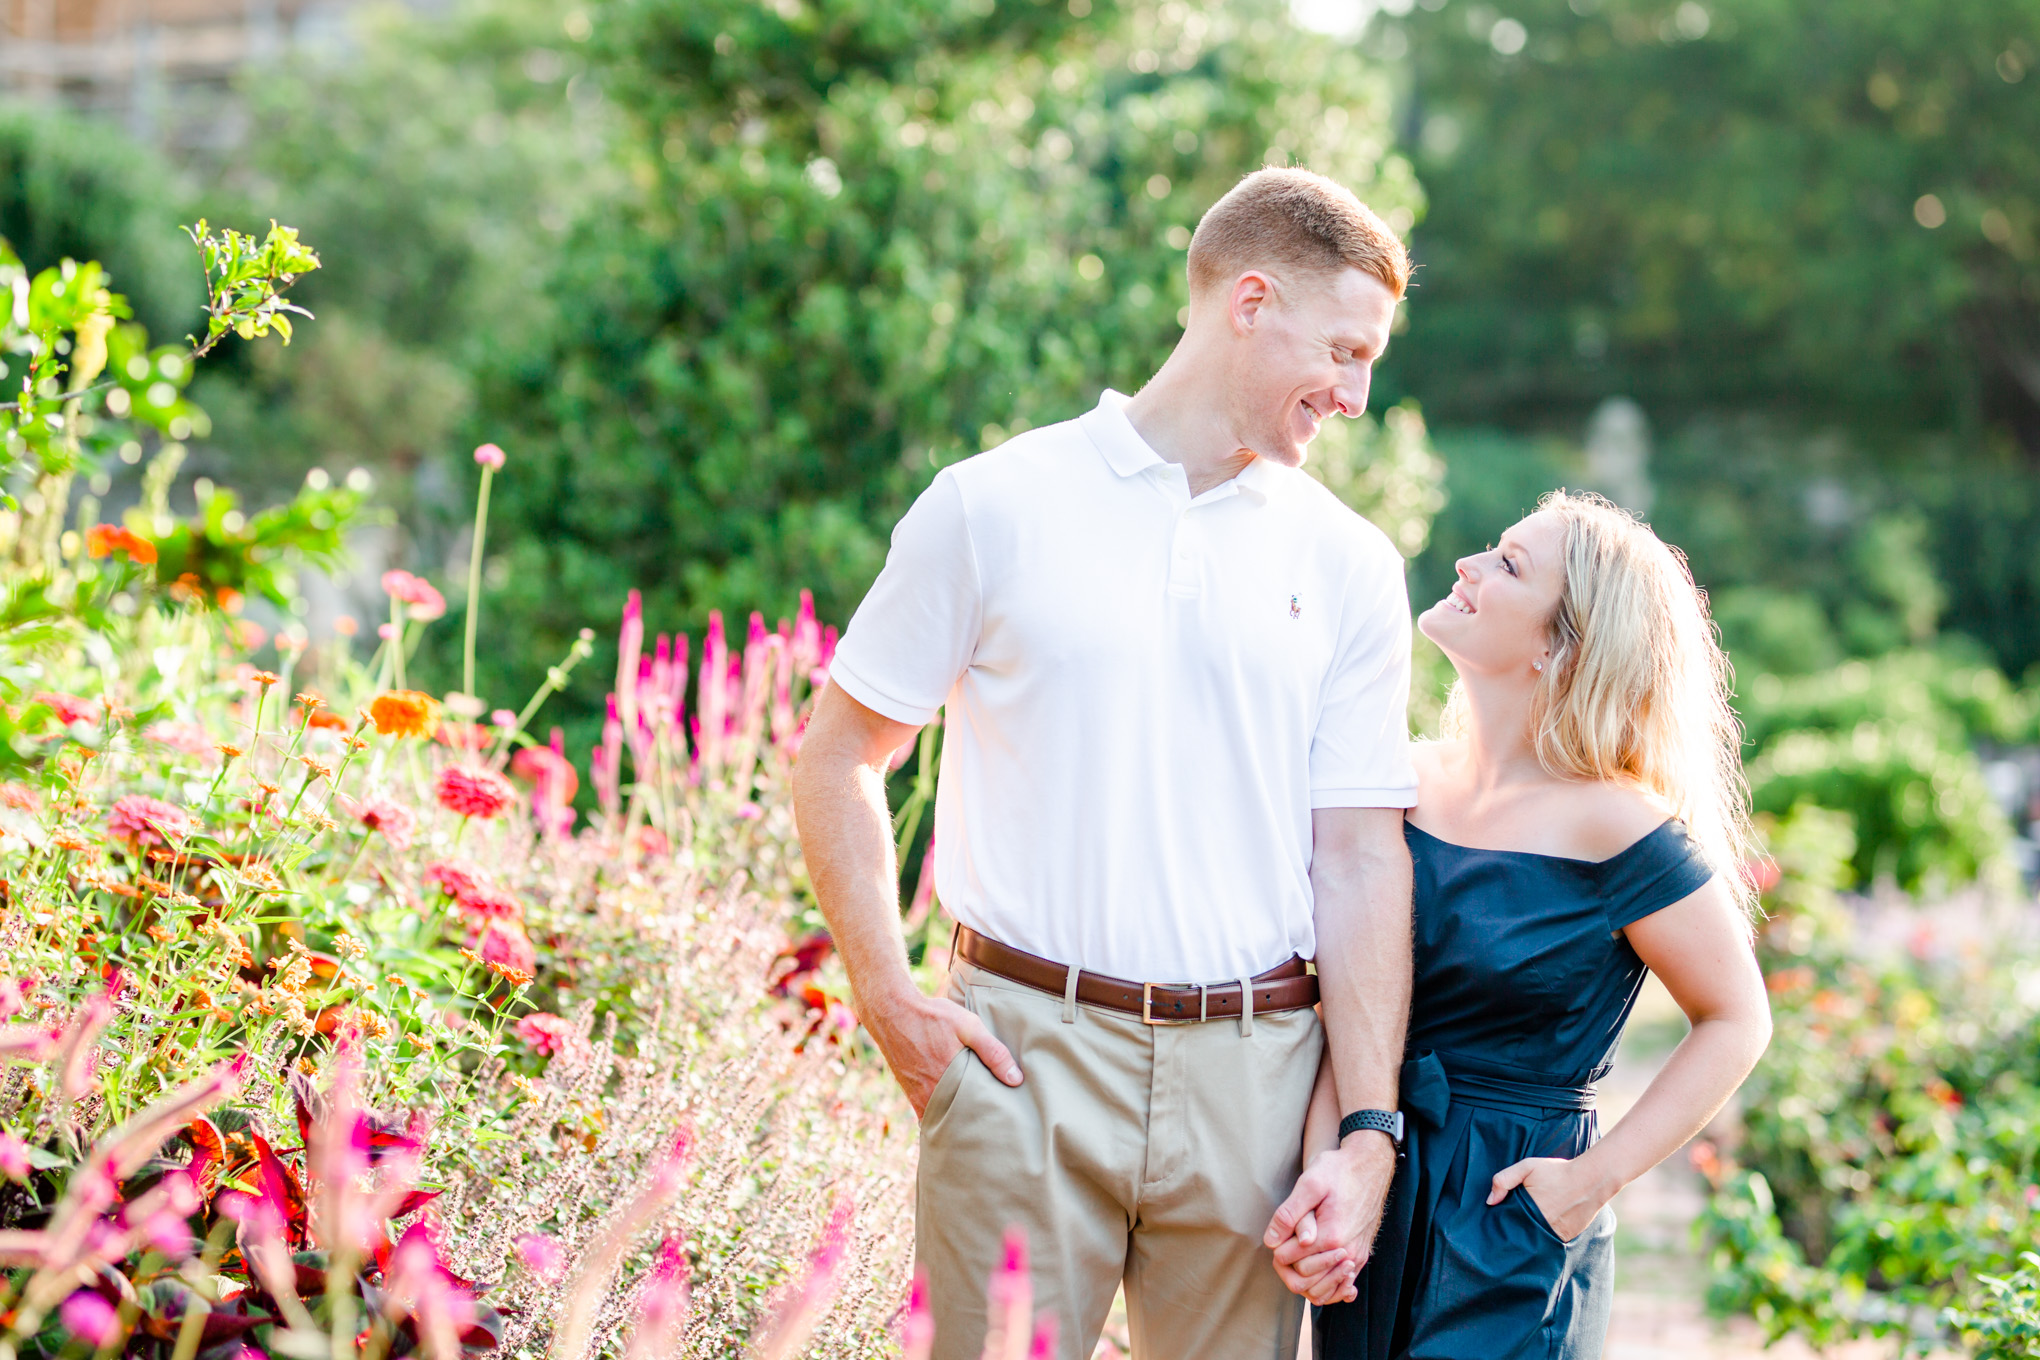 National Cathedral engagement photos, National Cathedral, D.C. engagement photos, classic engagement portraits, Washington National Cathedral, natural light engagement photos, D.C. engagement photographer, Rachel E.H. Photography, sunrise engagement photos, couple holding hands in garden